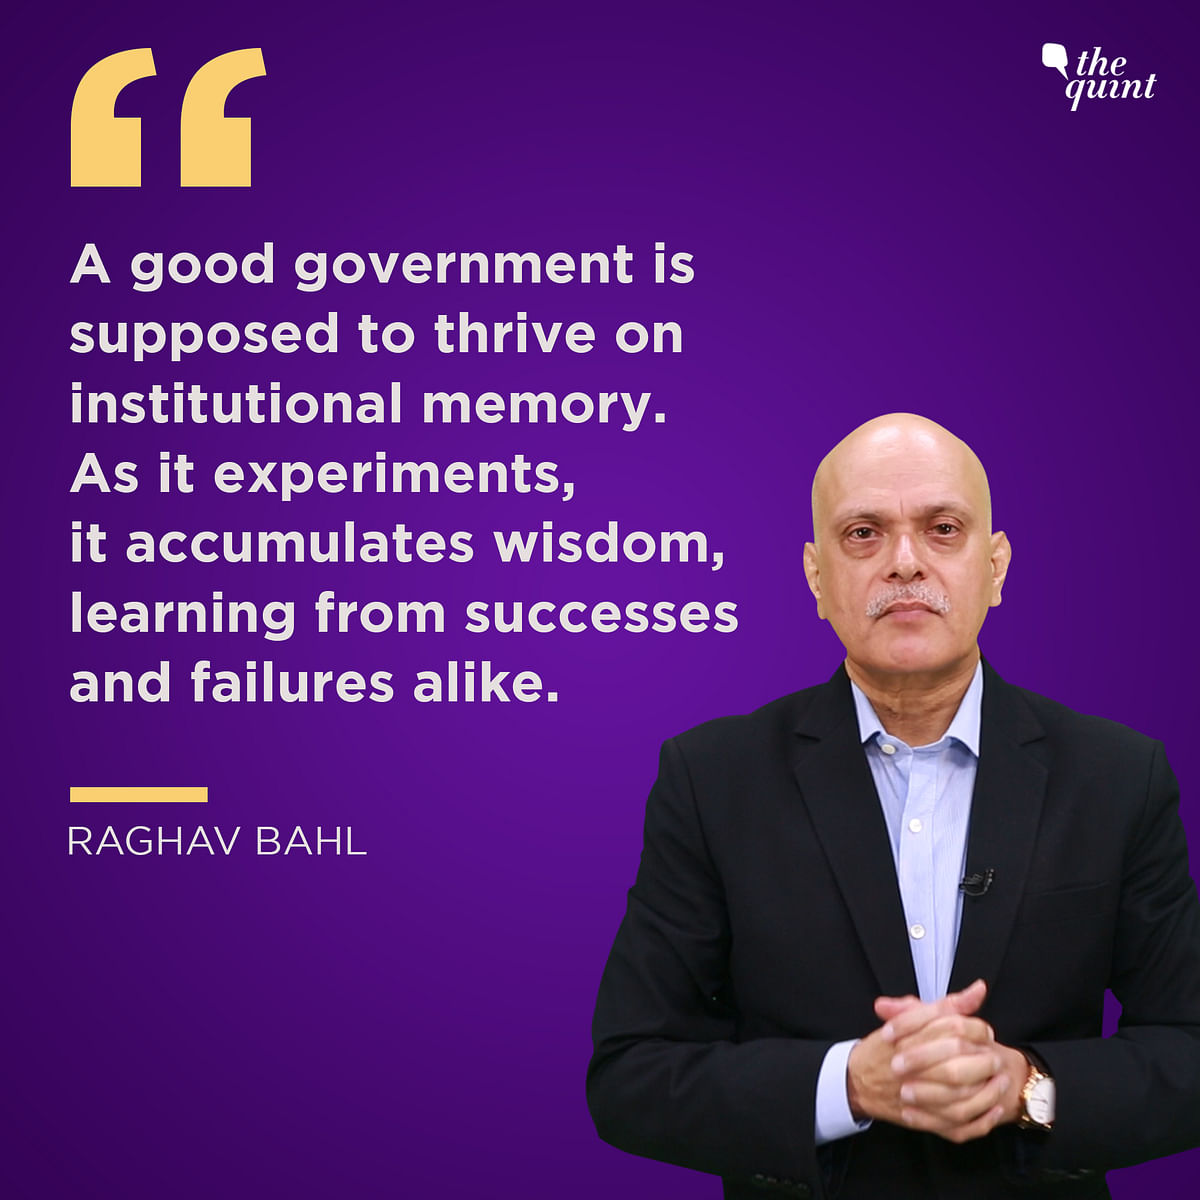 The Quint’s Founder-Editor Raghav Bahl explains the govt’s folly of not saving IL&FS – and its consequences.